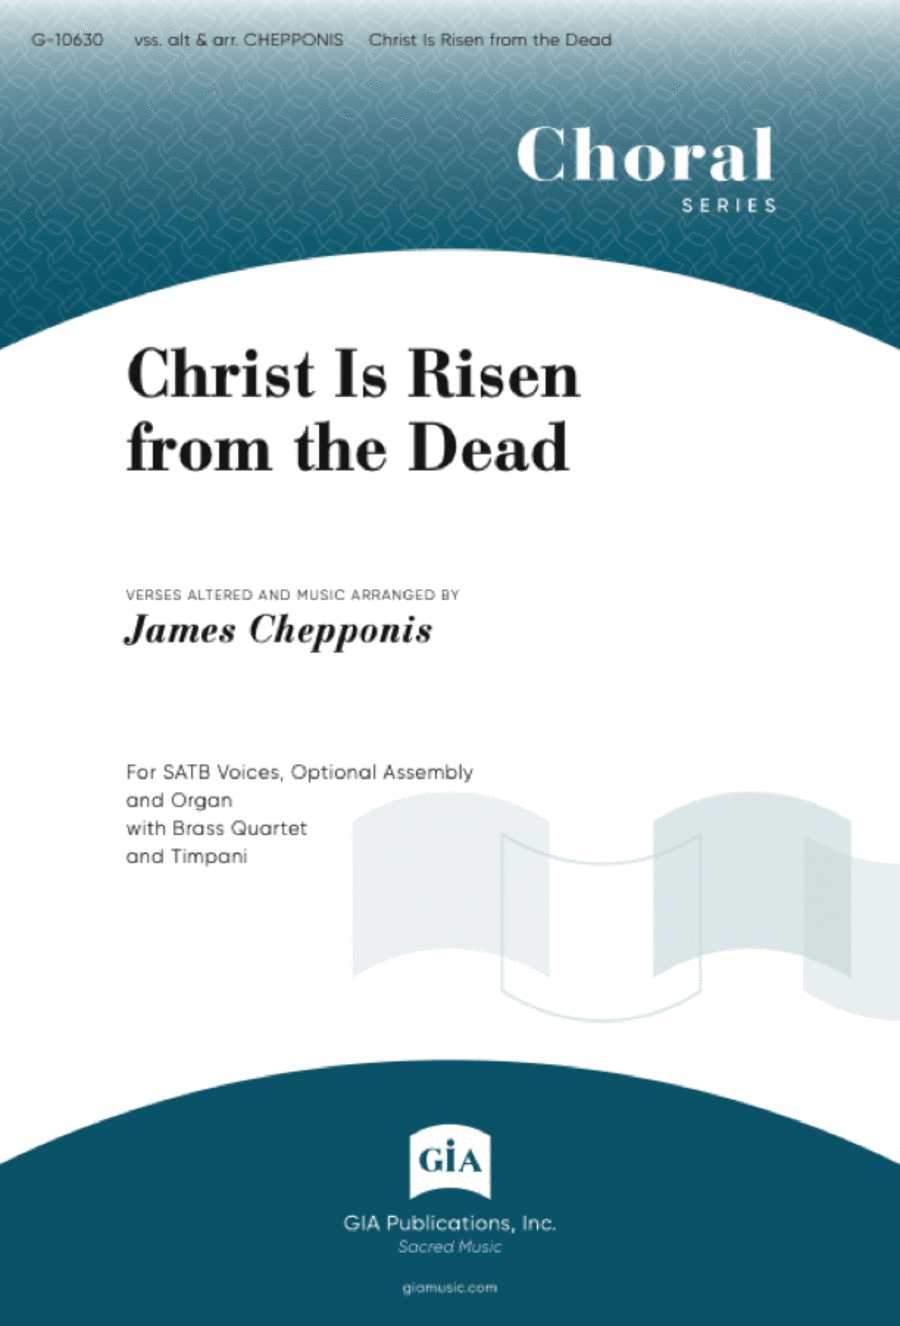 Christ is Risen from the Dead - Full Score and Parts